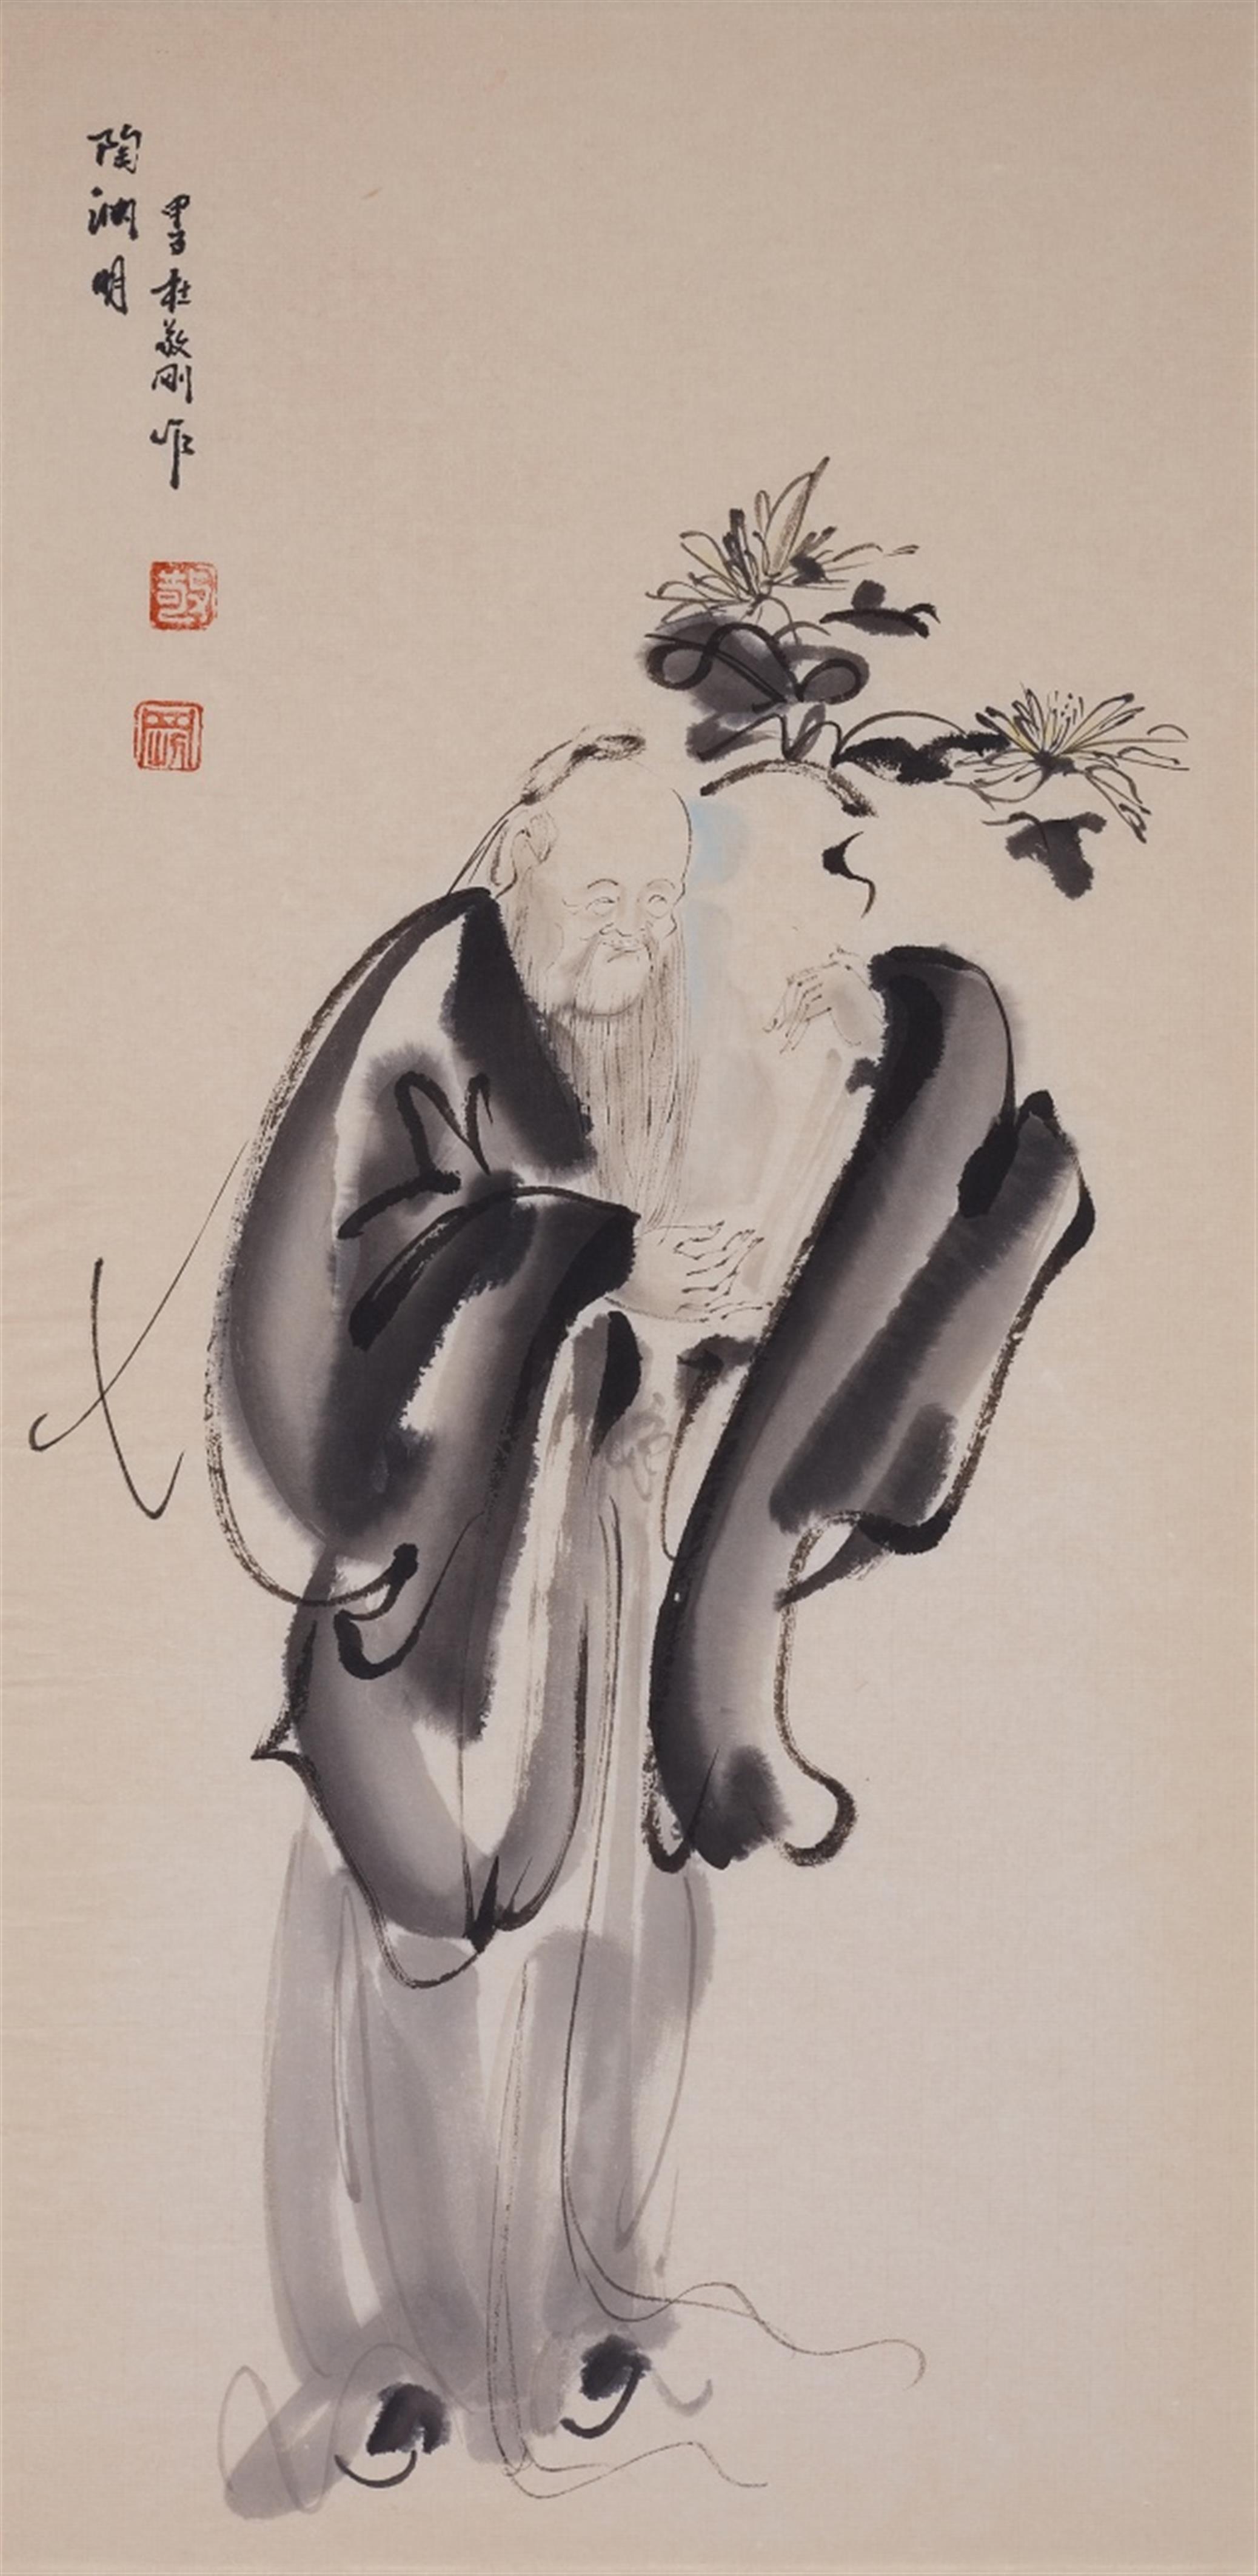 Du Jinggang - The poet Tao Yuanming with chrysanthemums. Ink and light colour on paper. Inscription, dated cyclically 

mit Chrysanthemen. Tusche und wenige Farben auf Papier. Aufschrift, z... - image-1